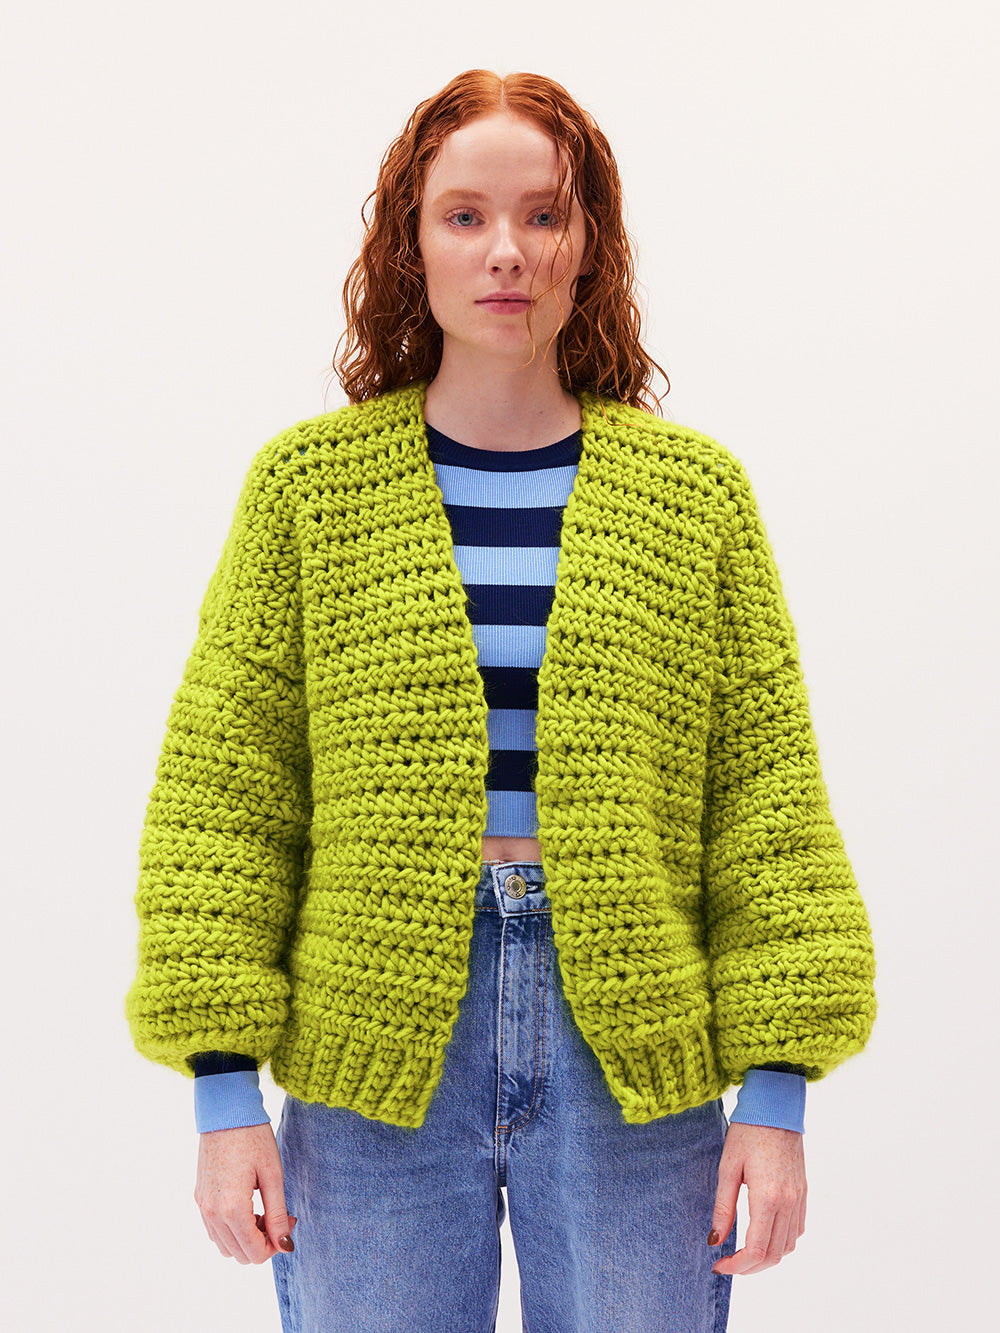 Learn to Crochet the Clare Cardigan with Cardigang